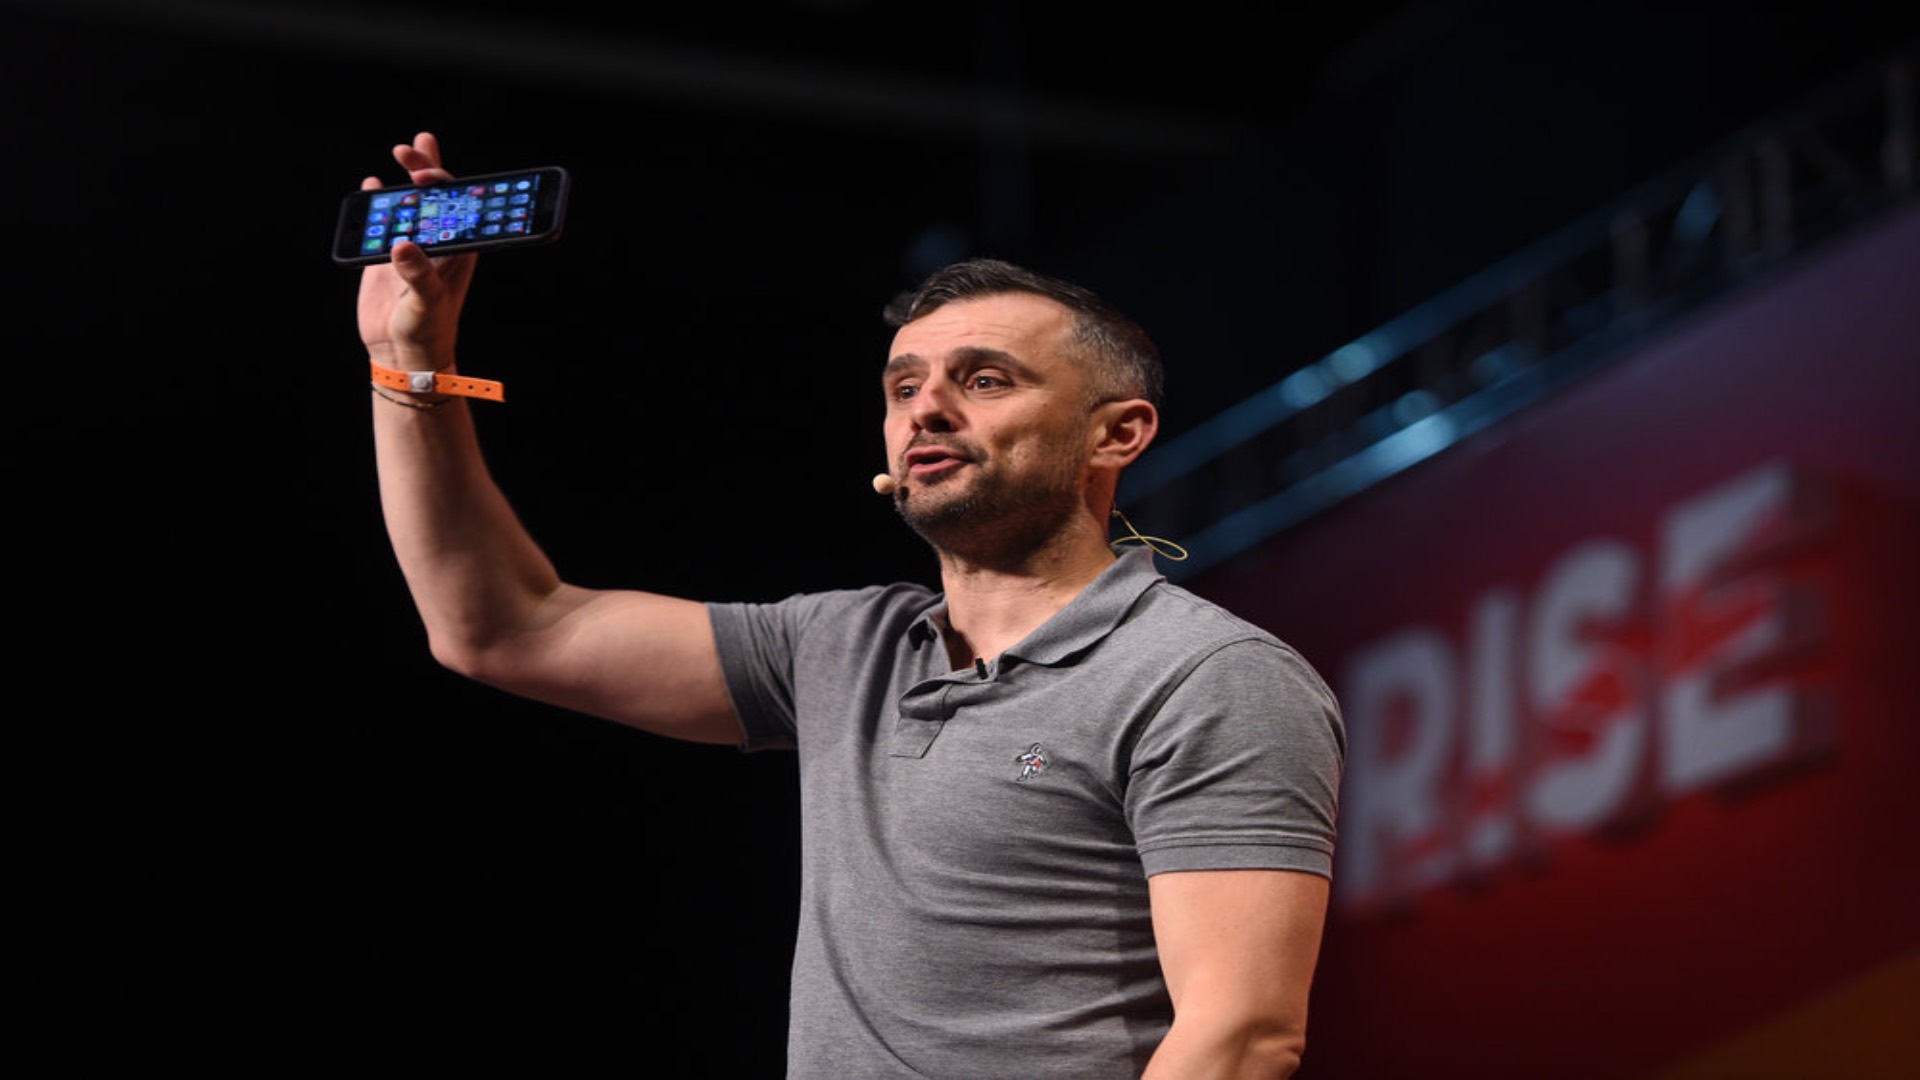 From E-Commerce Expert to NFL Owner: How Gary Vee is Positioning Himself to Buy the New York Jets